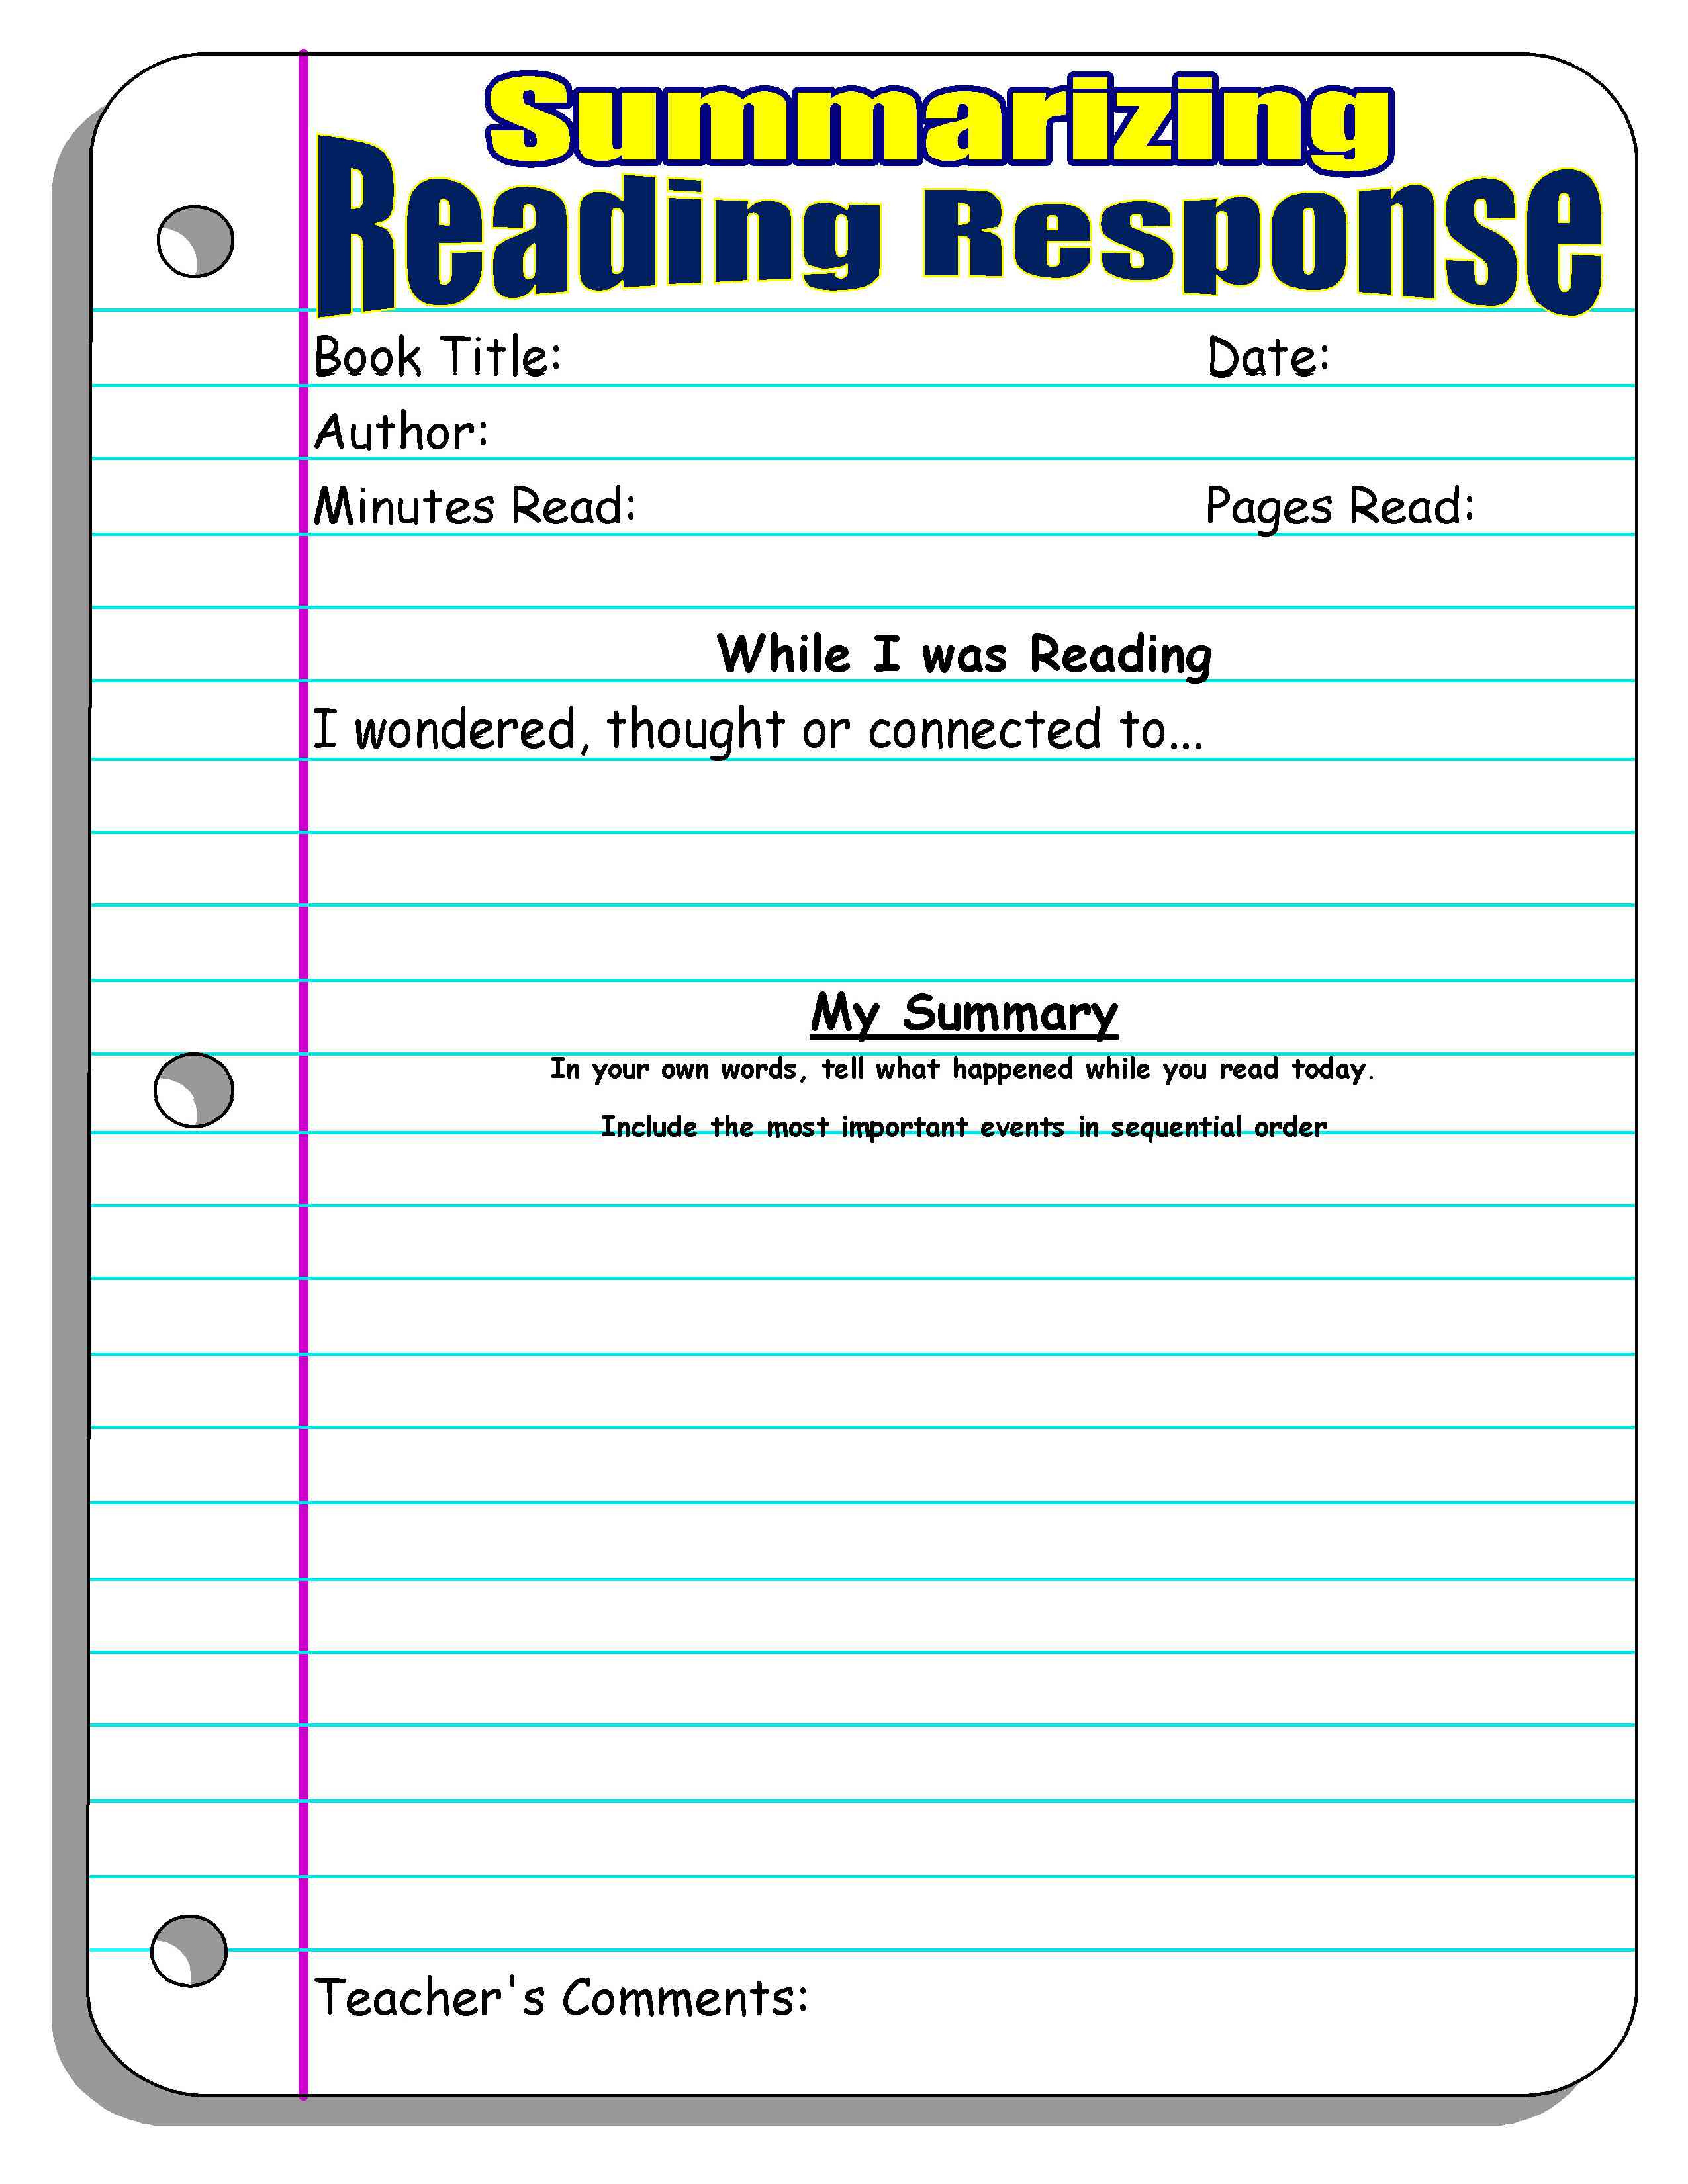 Summary Worksheets 5th Grade Reading Response forms and Graphic organizers